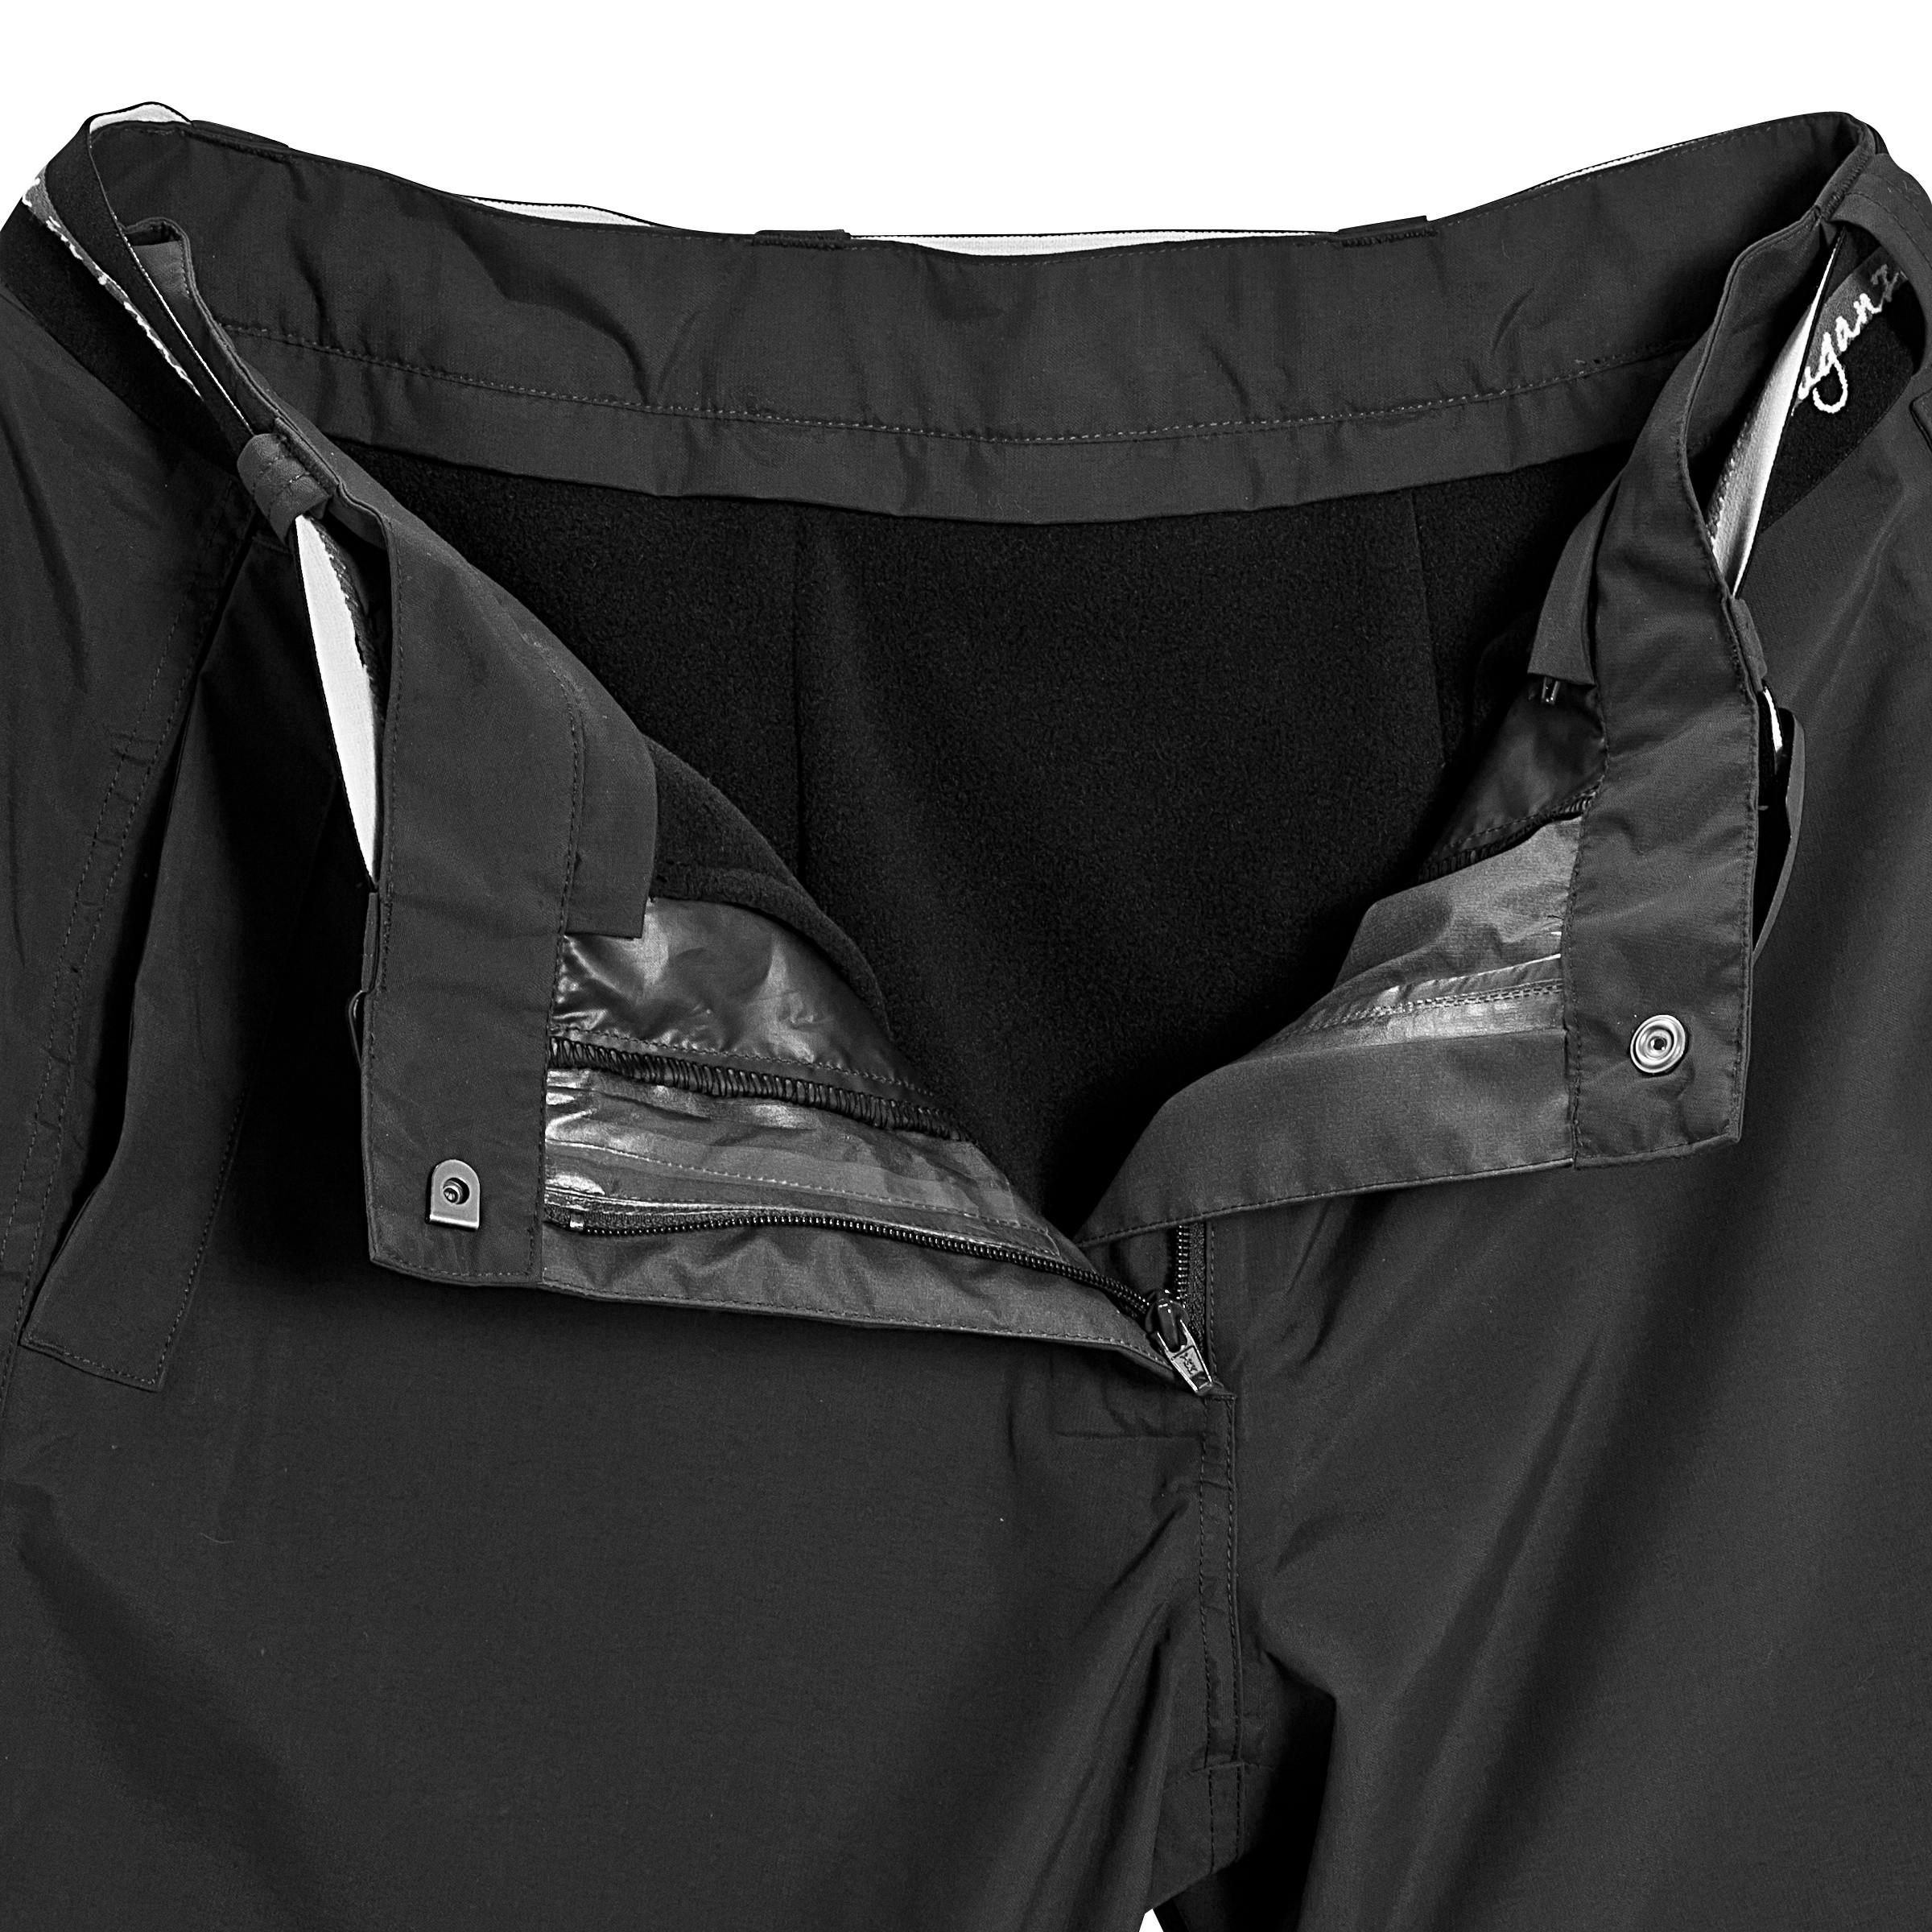 500 Adult 2-in1 Waterproof Horse Riding Overtrousers - Black 8/14